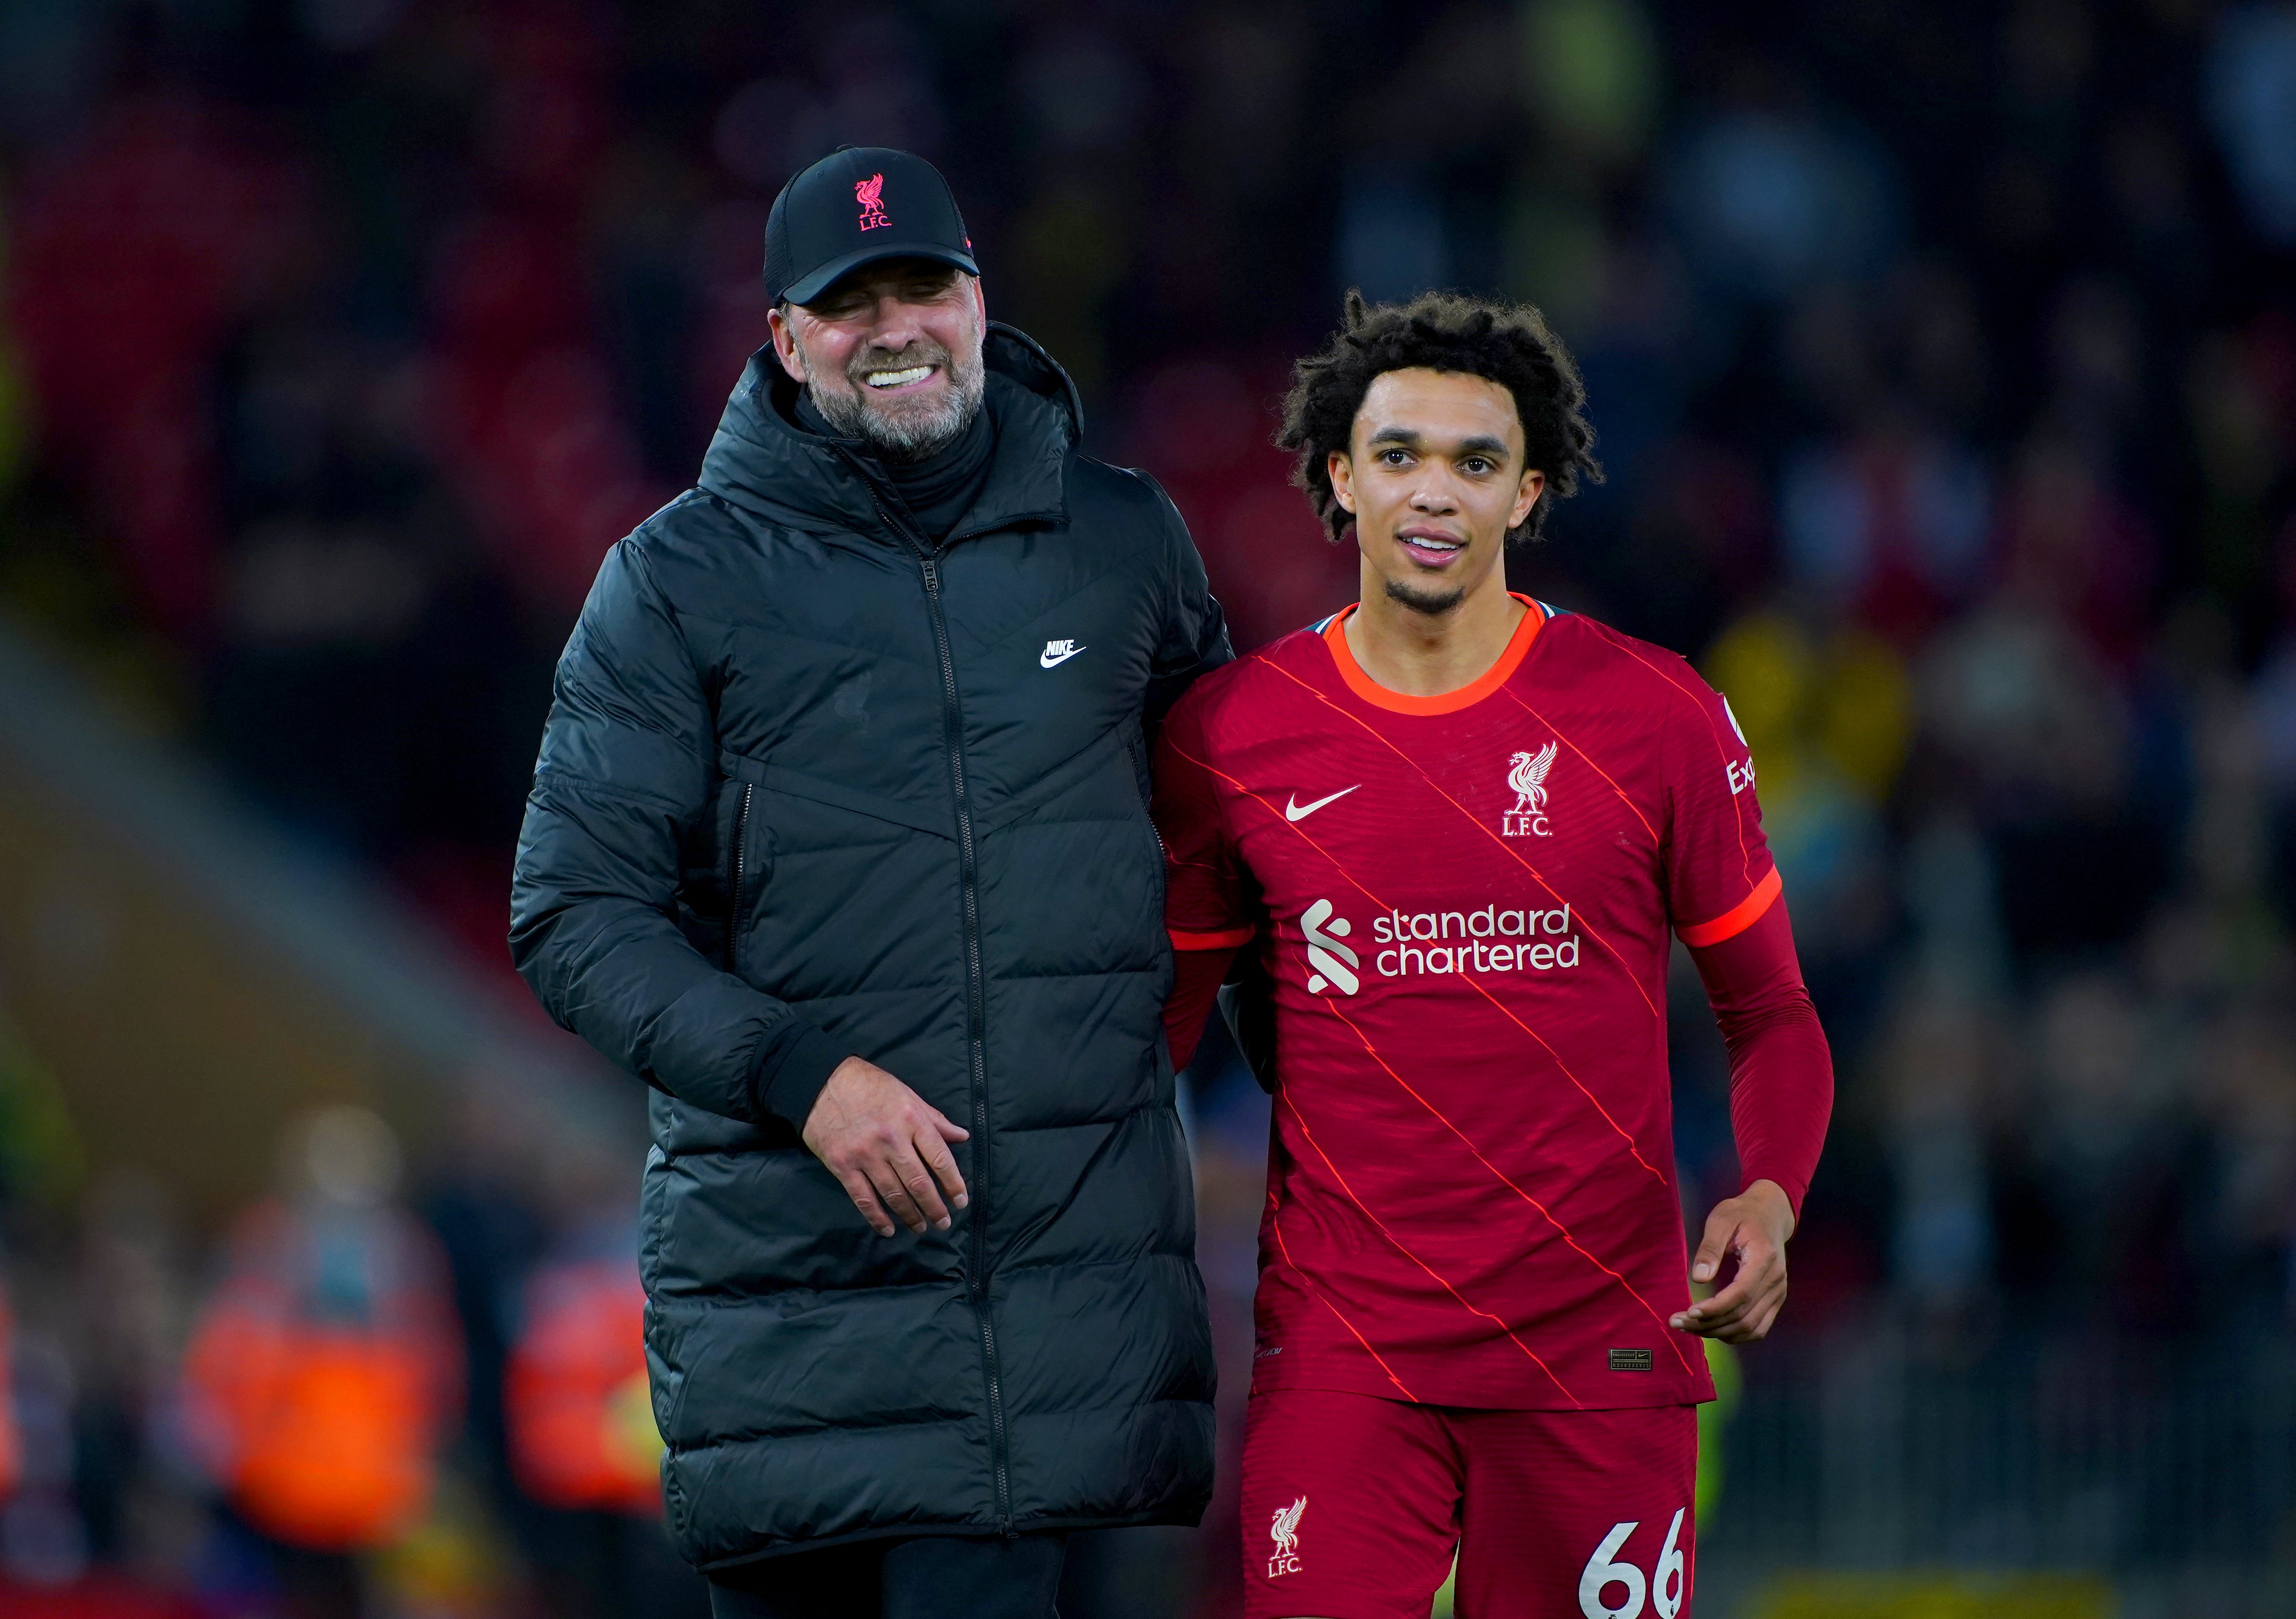 Liverpool vice-captain Trent Alexander-Arnold could play in midfield against Brentford says Jurgen Klopp. 